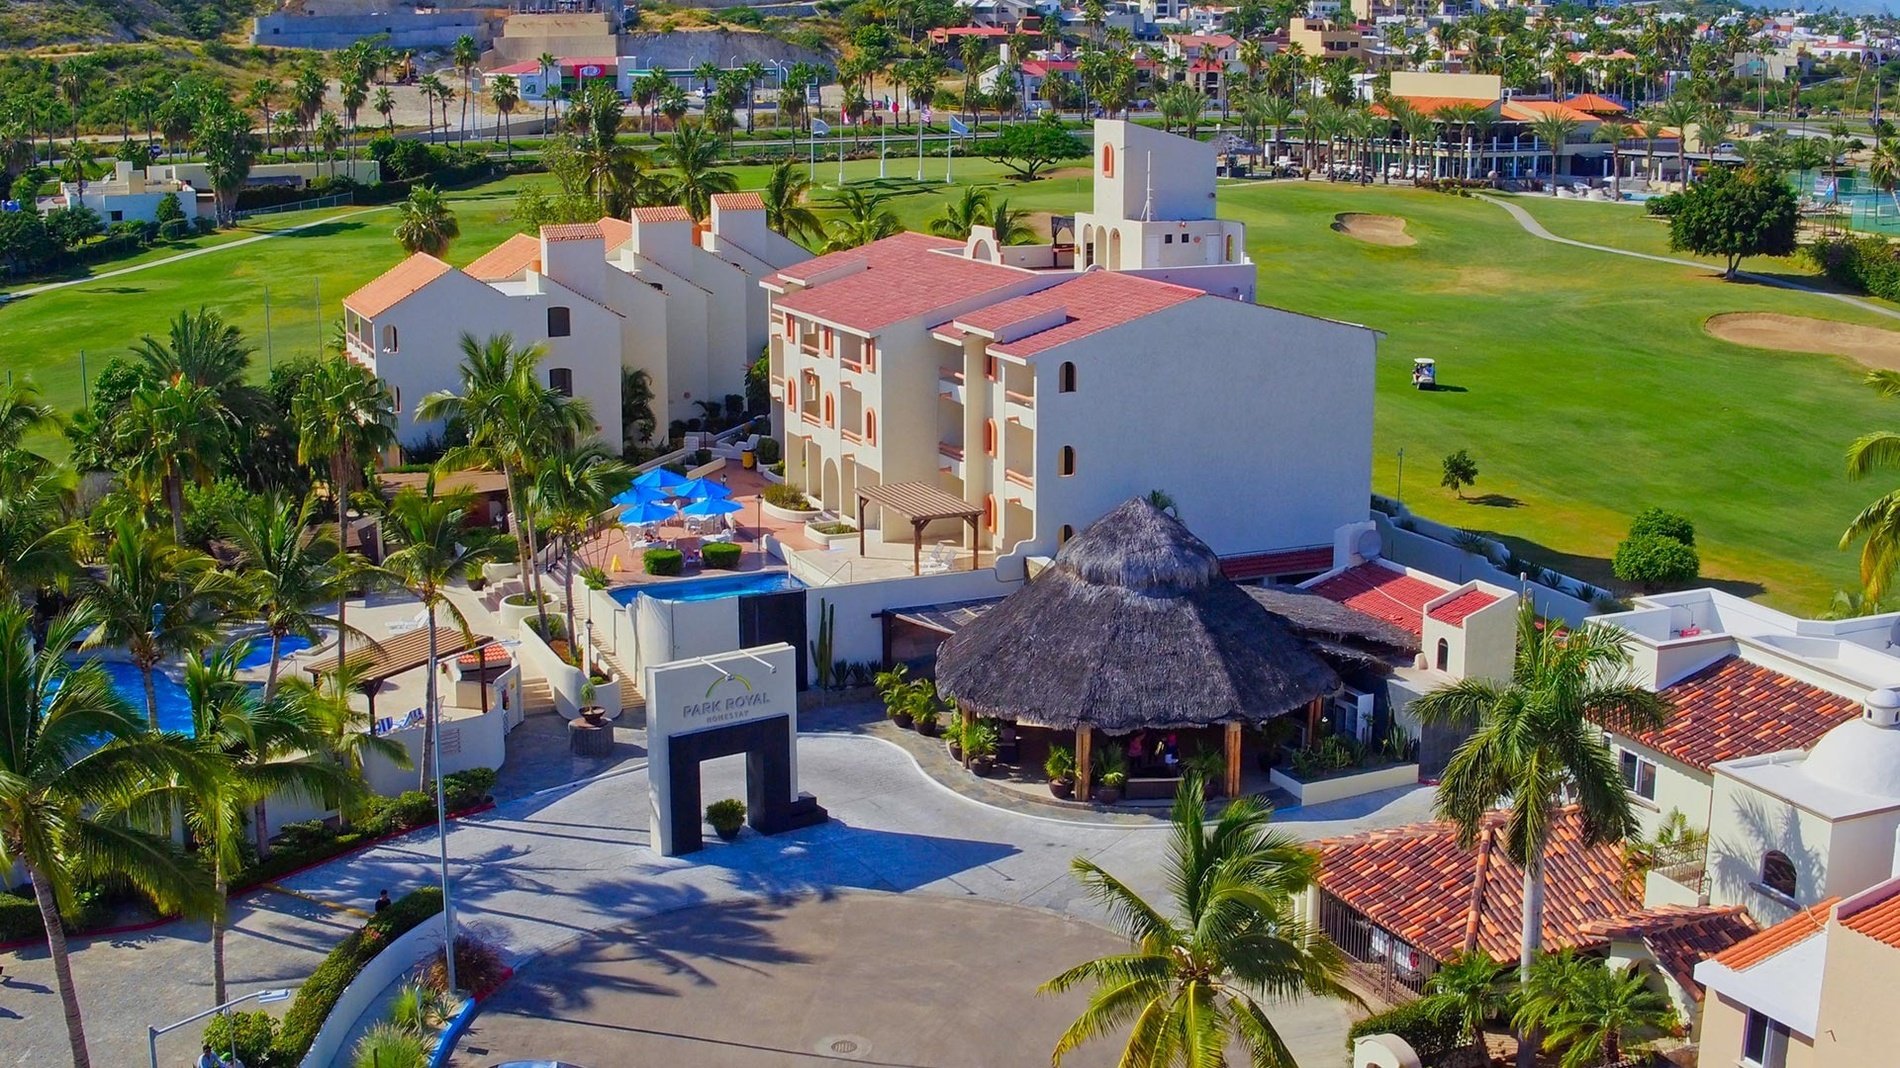 Panoramic view of the entrance and facilities of Homestay Los Cabos in Baja California Sur